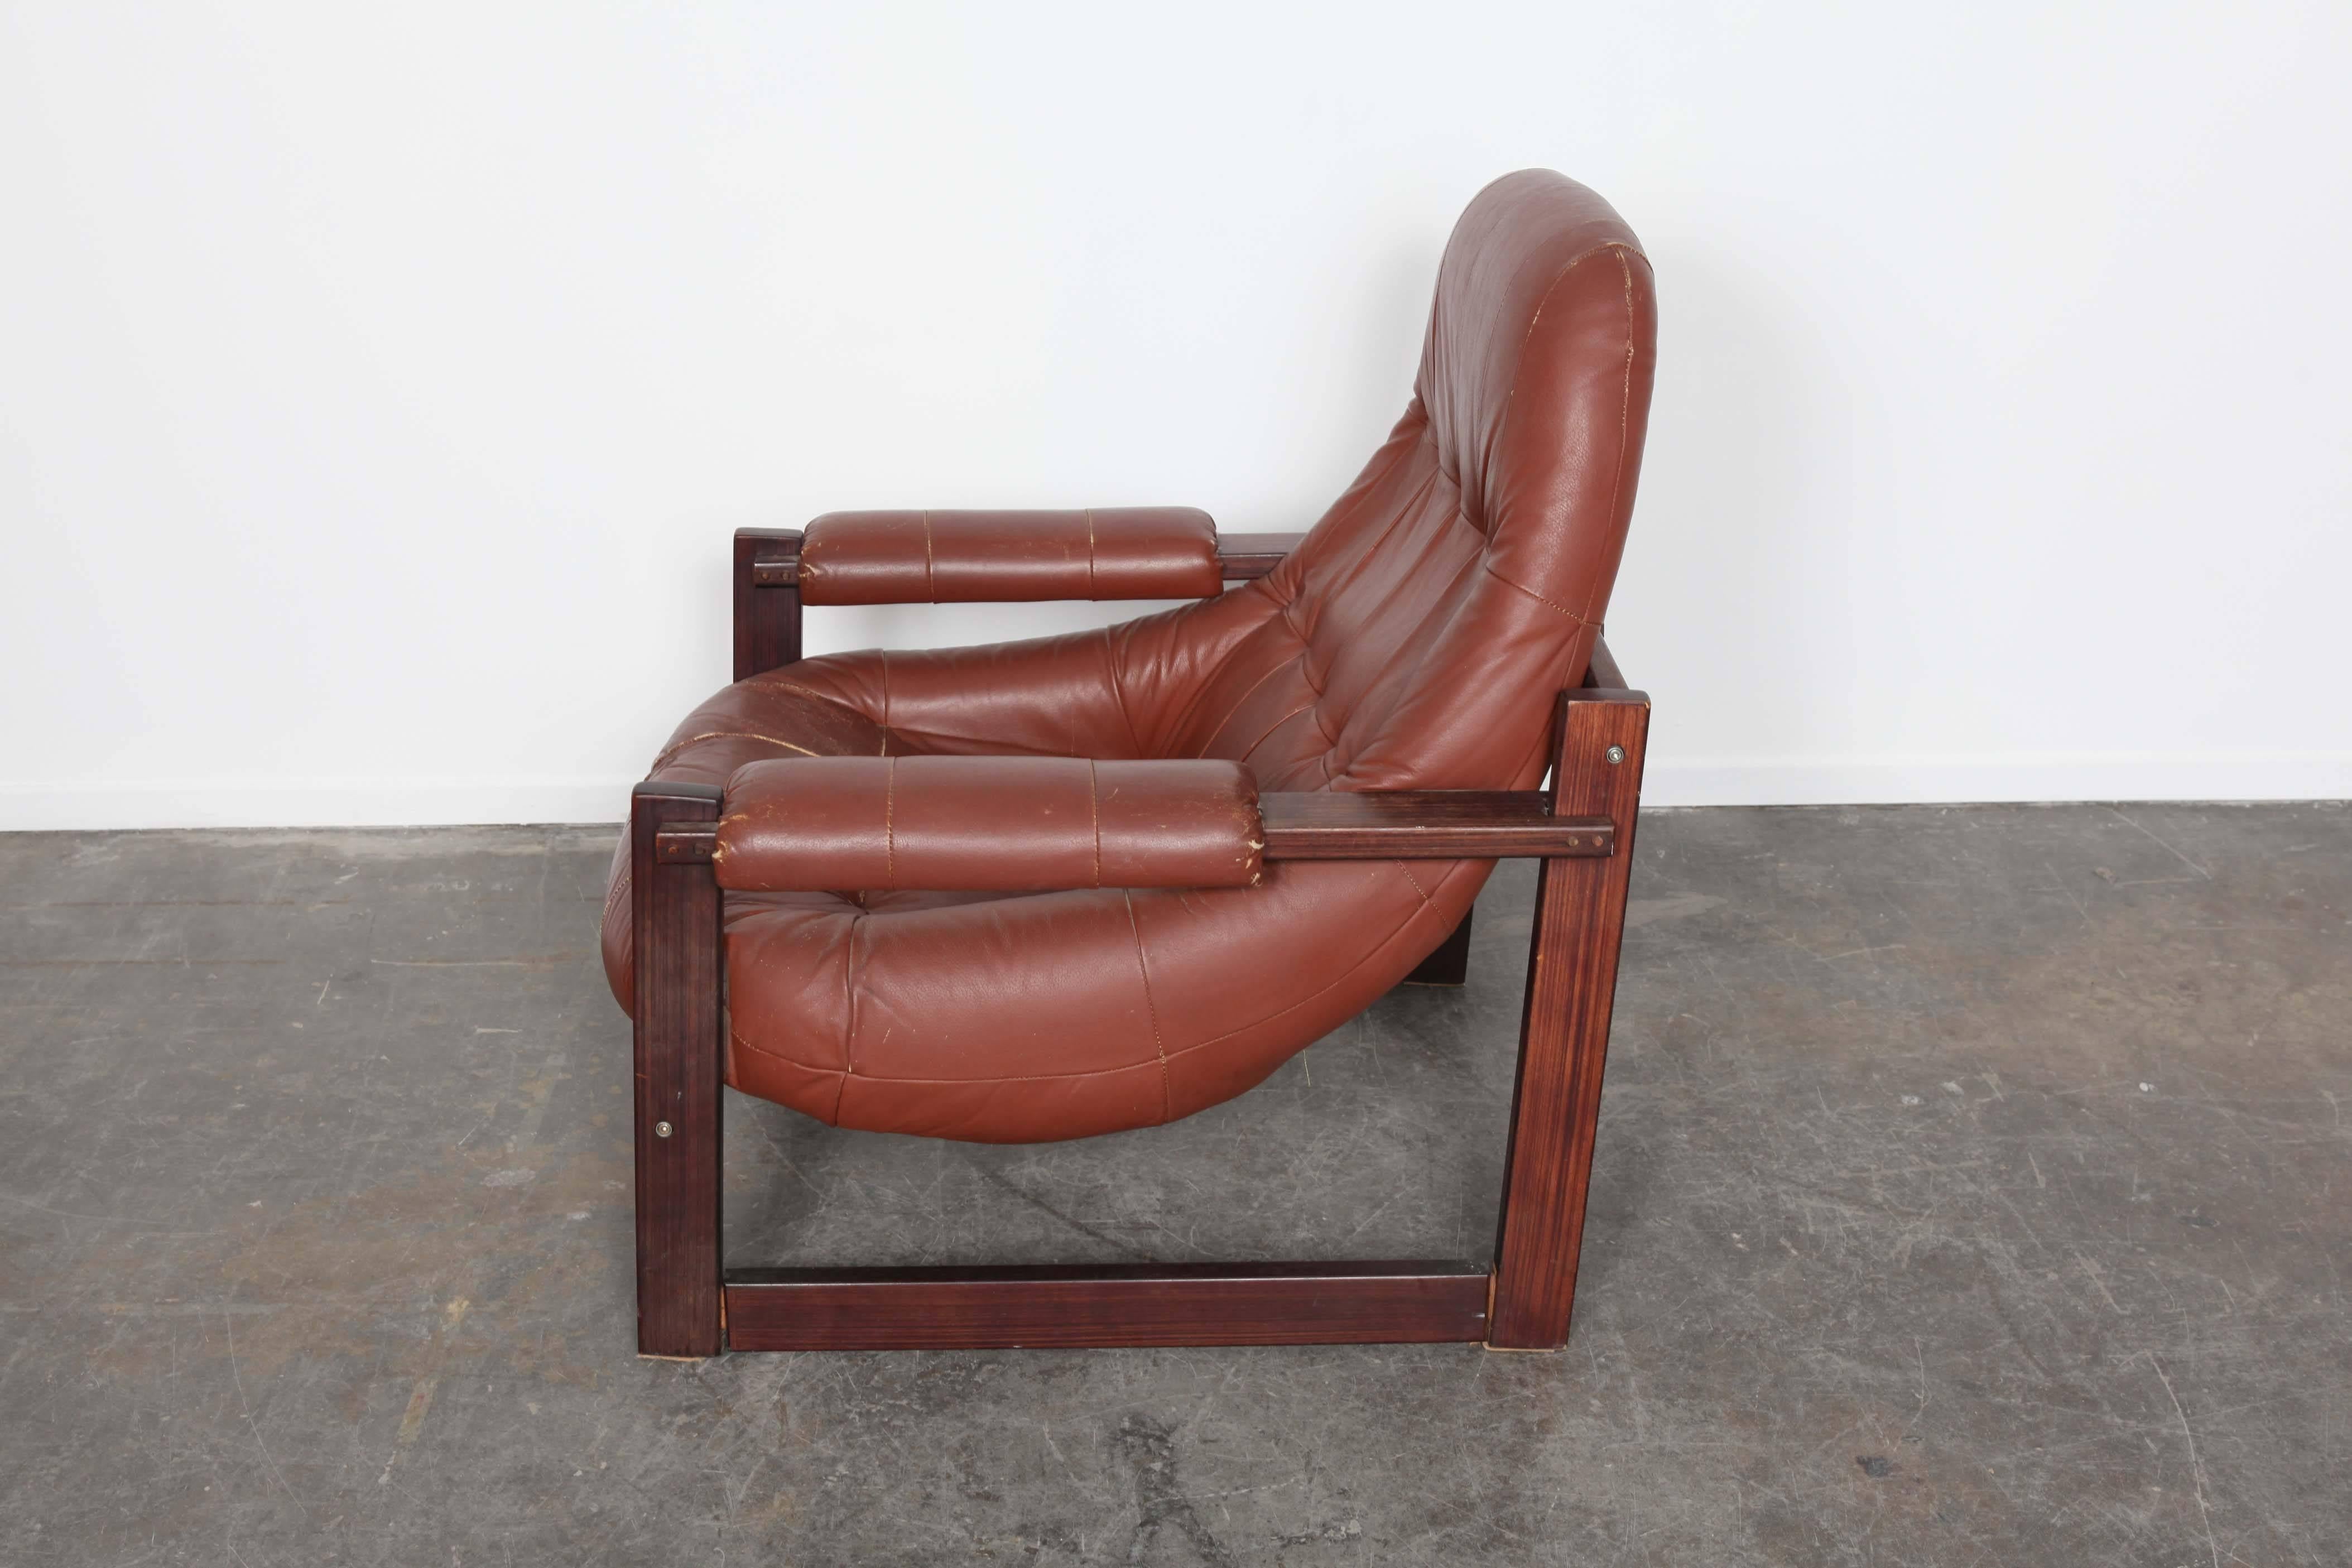 Percival Lafer MP-167 Brazilian Lounge Chair In Original Brown Leather For Sale 1